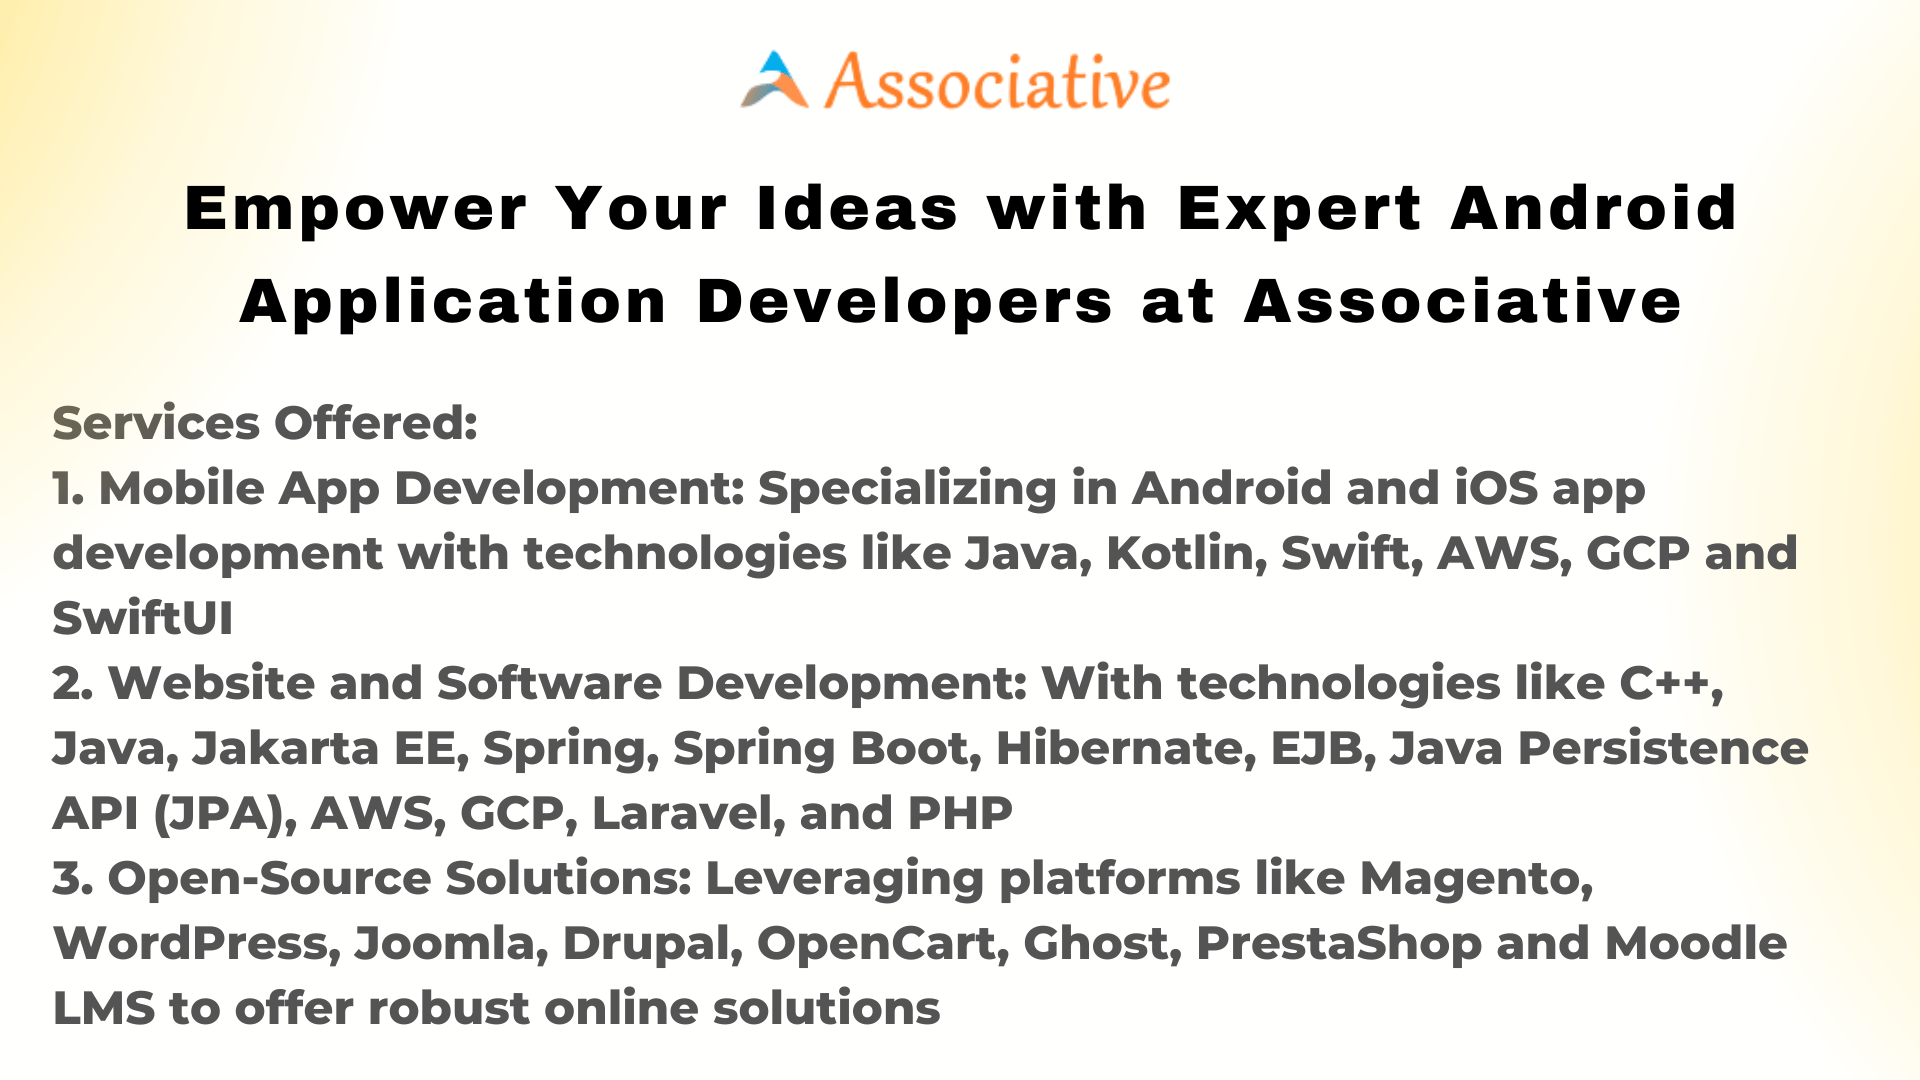 Empower Your Ideas with Expert Android Application Developers at Associative